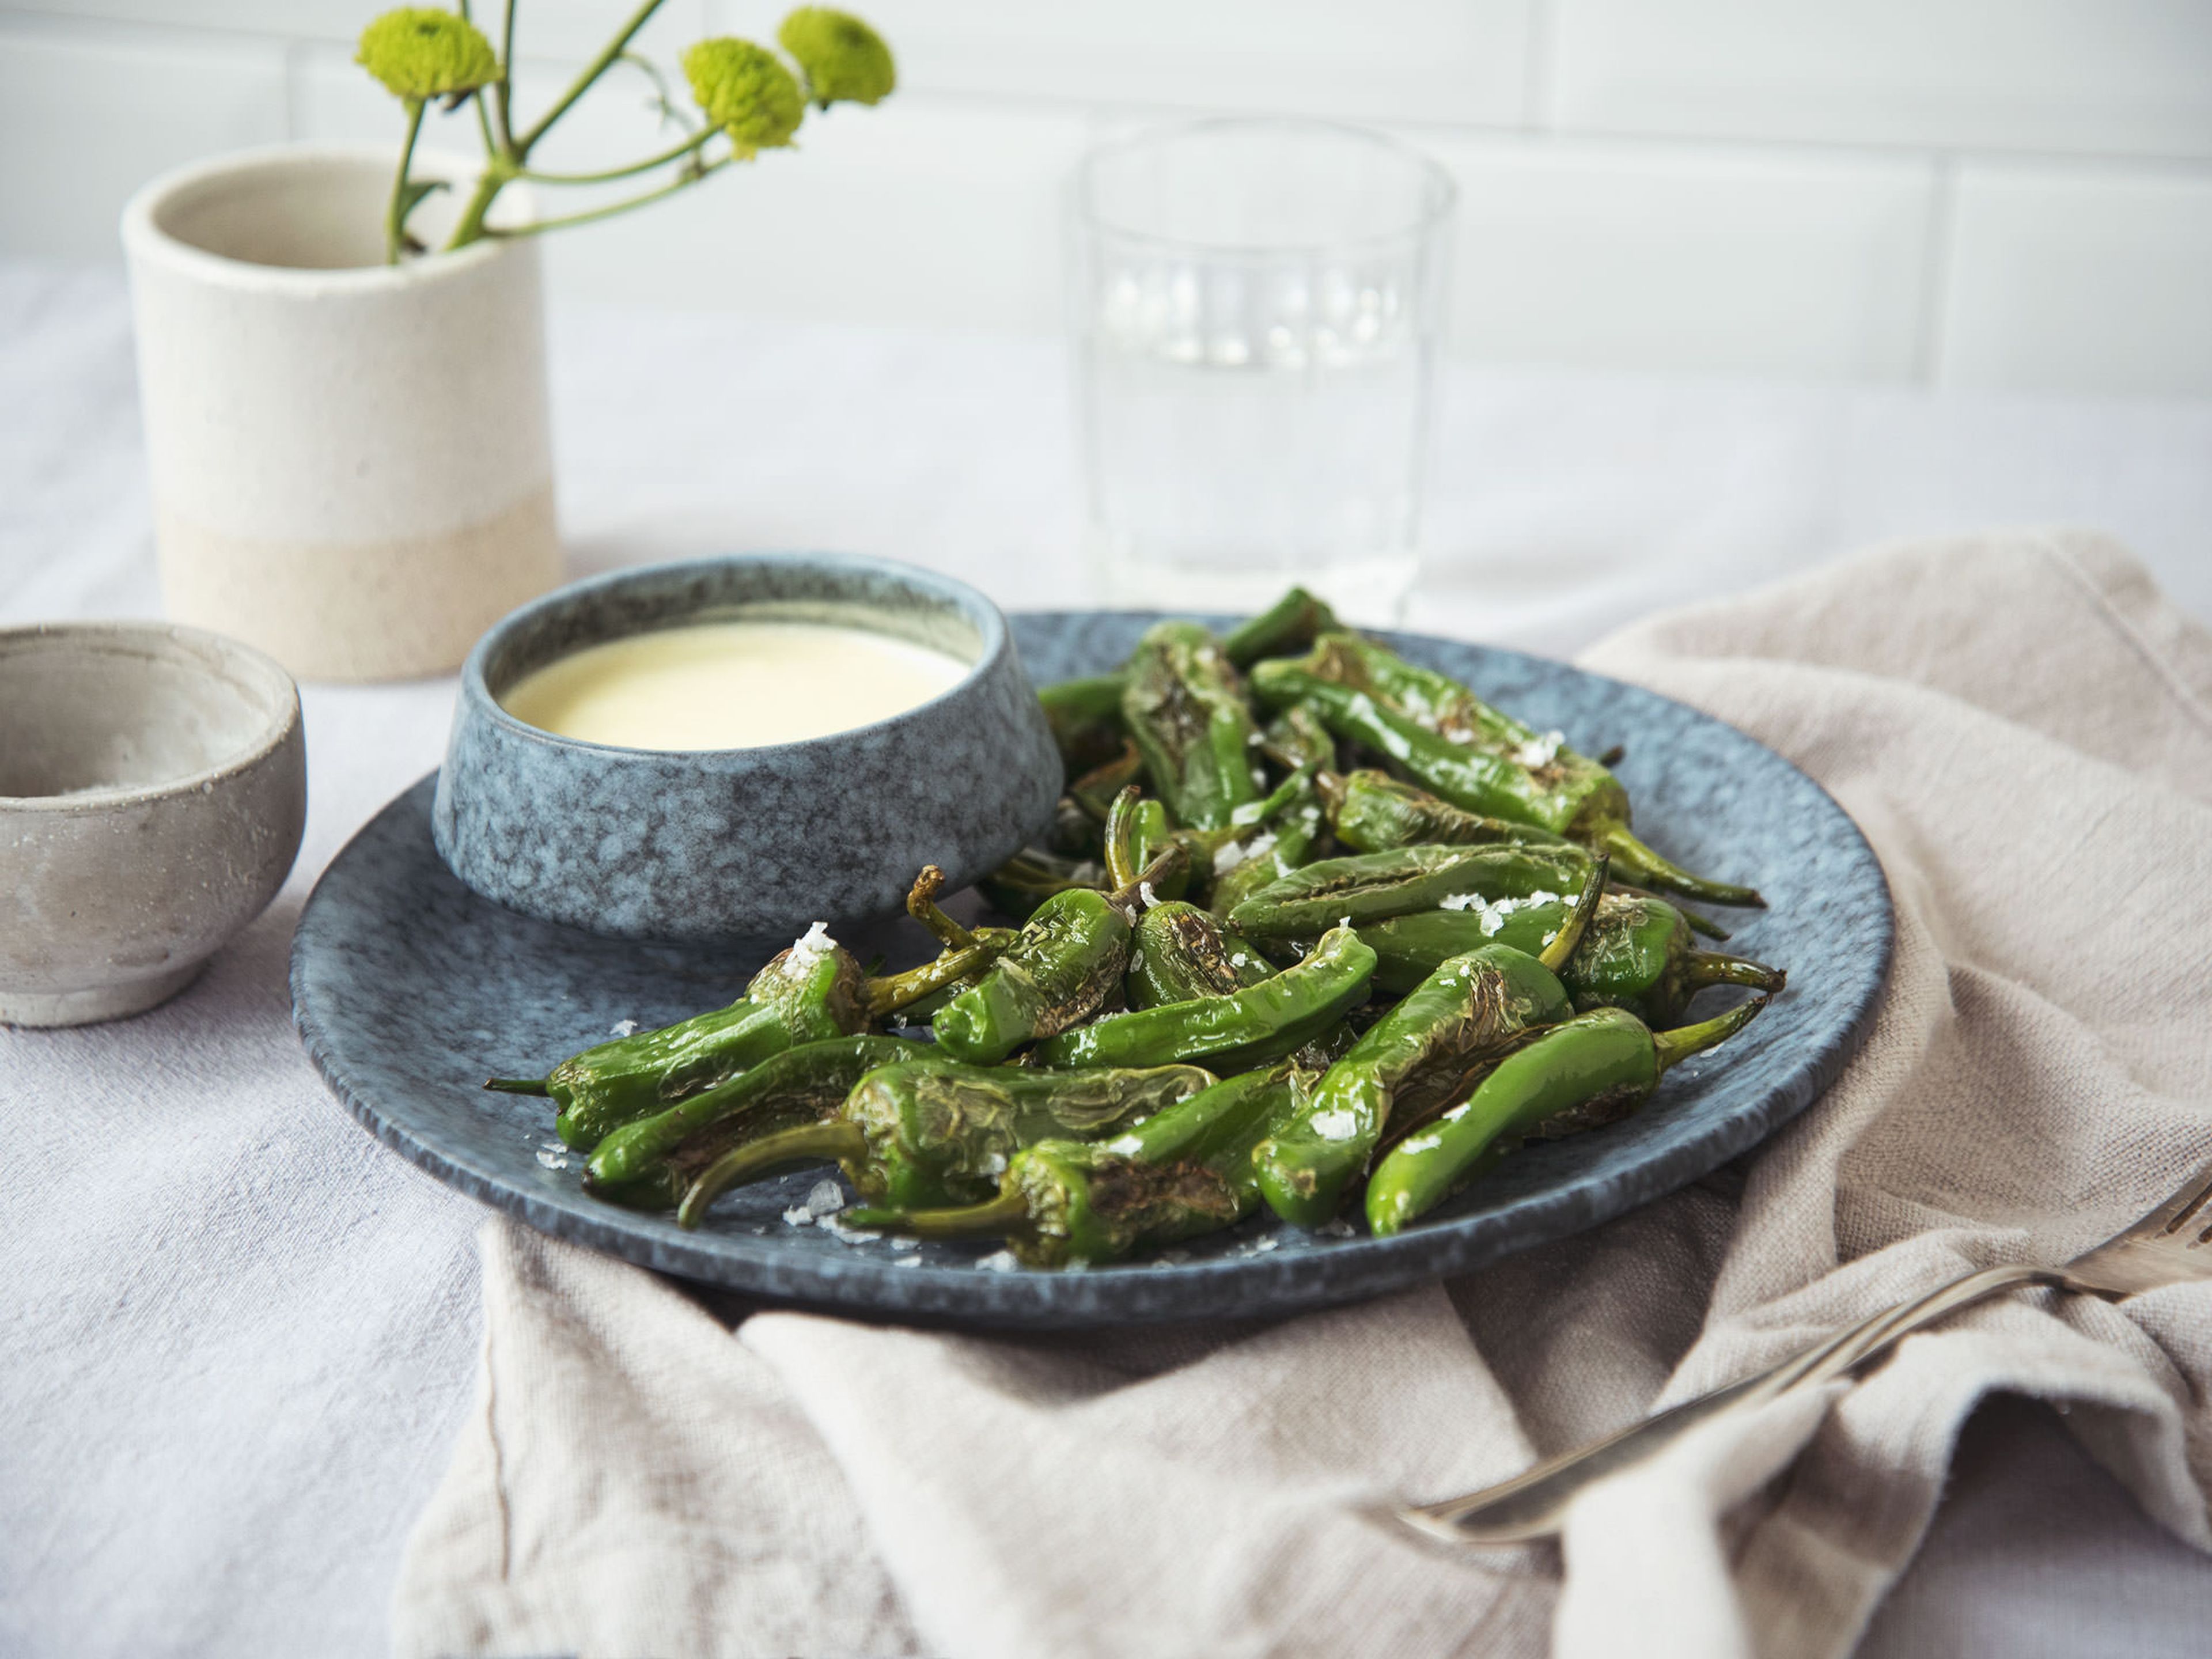 Blistered padrón peppers with garlic dip